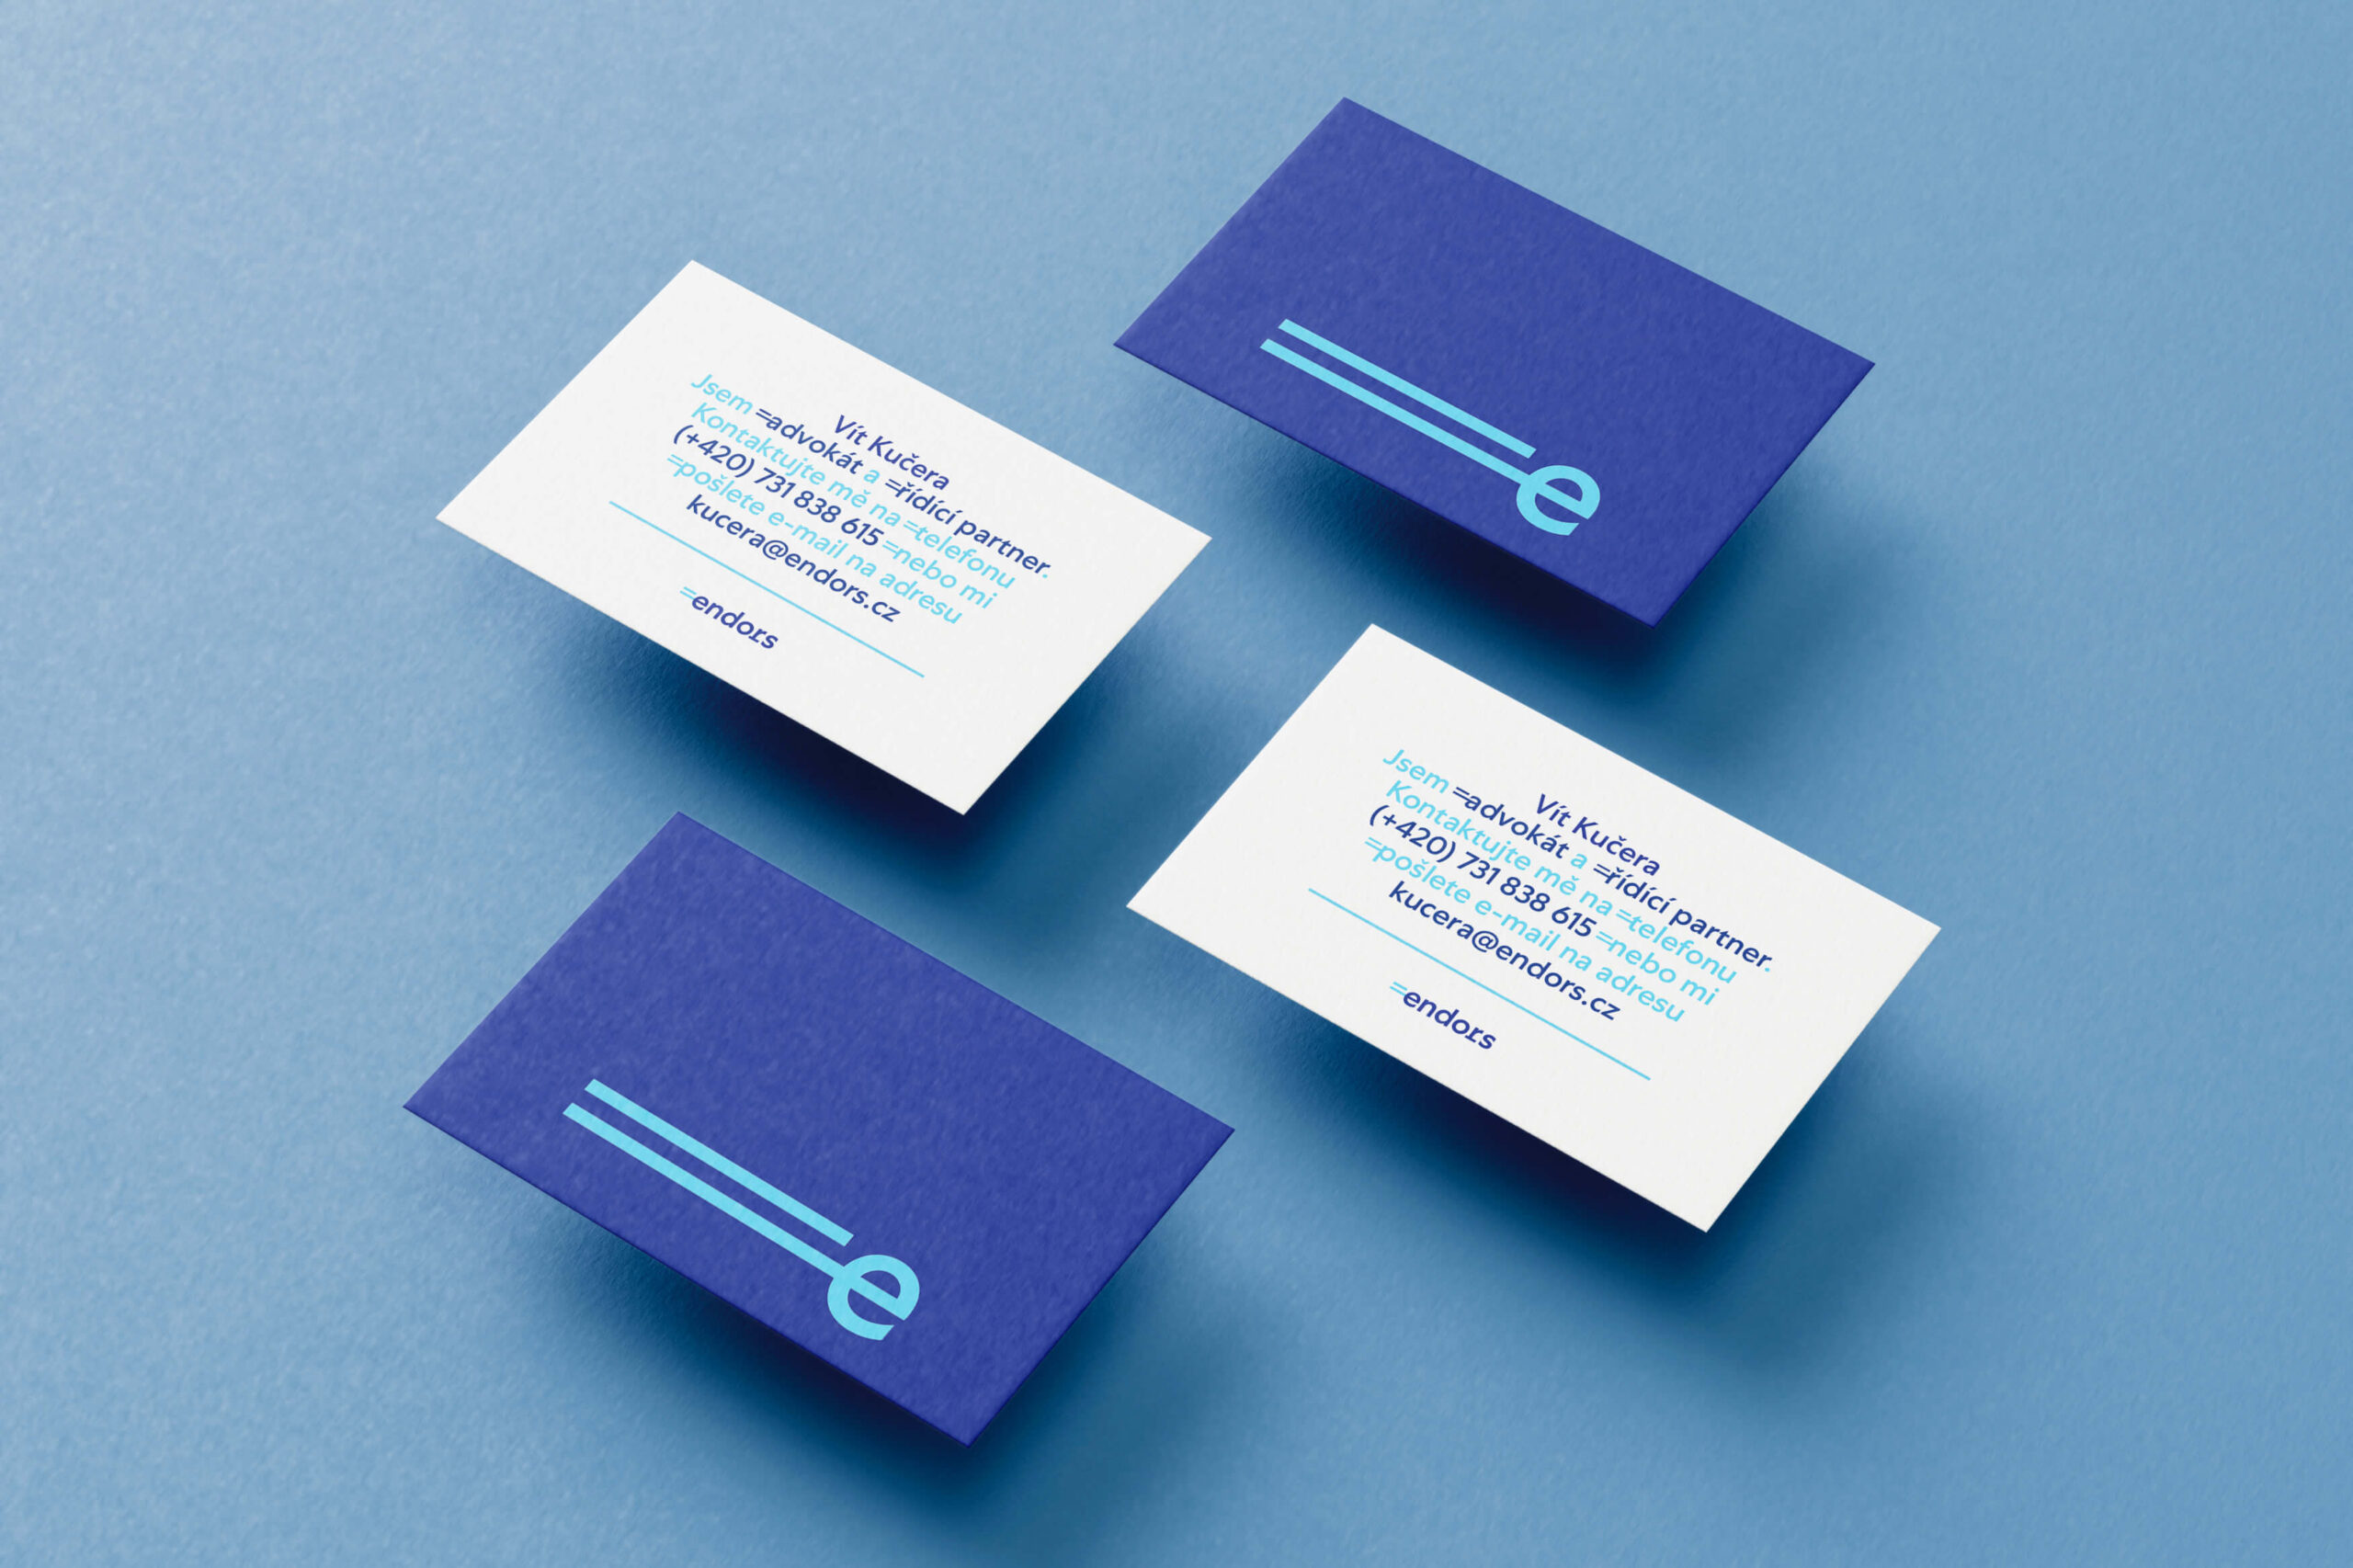 endors_Business_Cards6